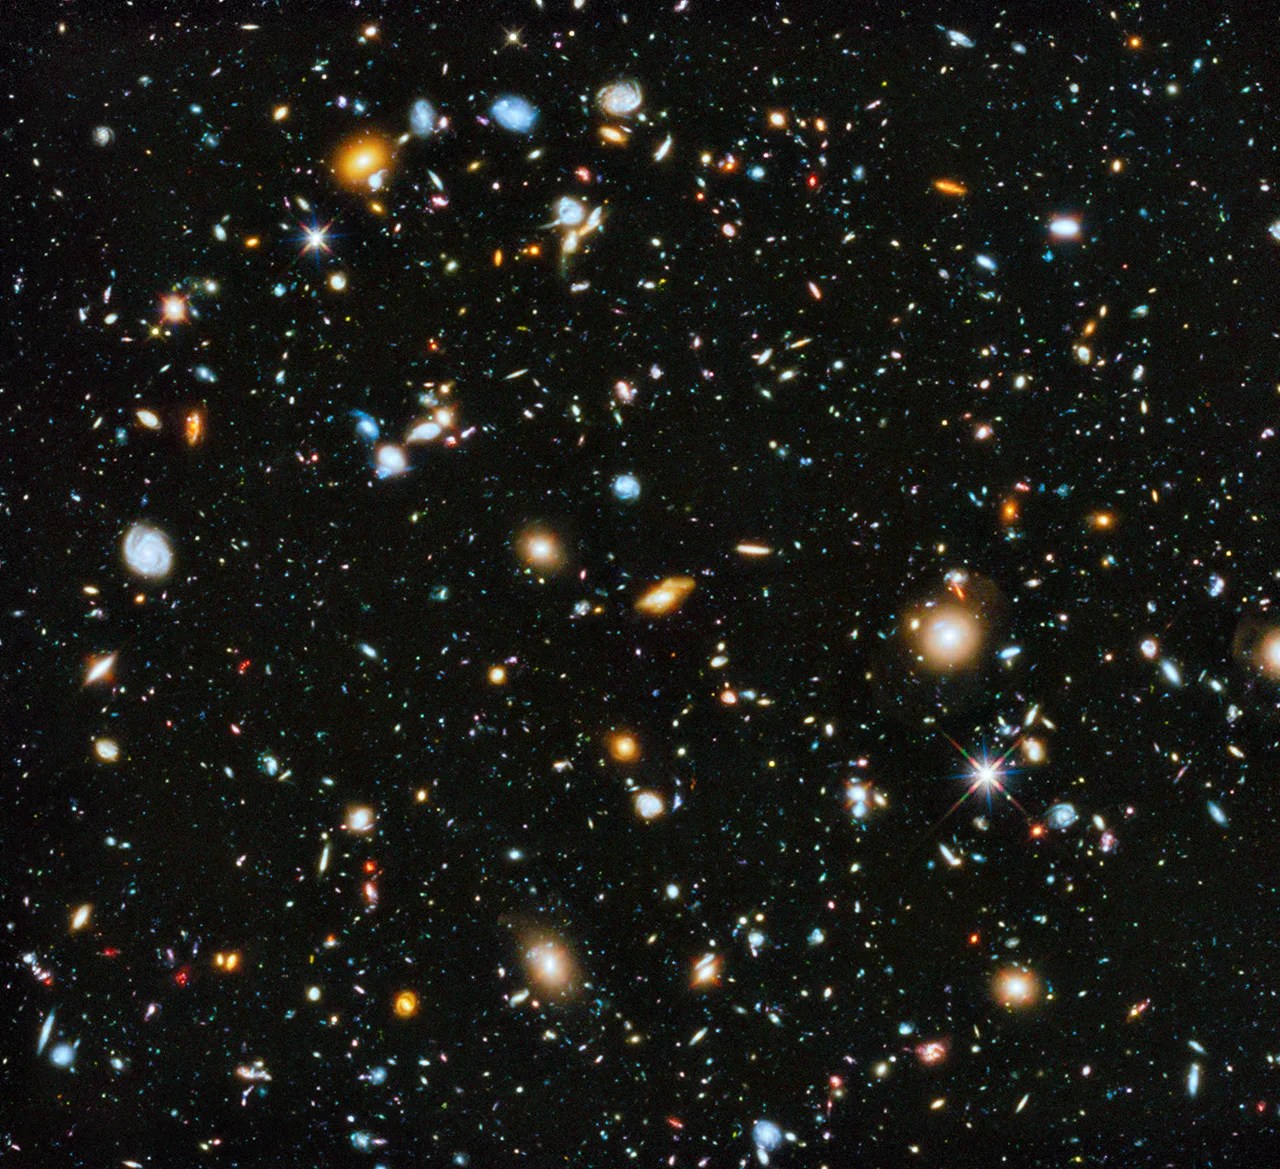 A deep field image containing about 10,000 galaxies of different distances from Earth, shapes, sizes, and colors.